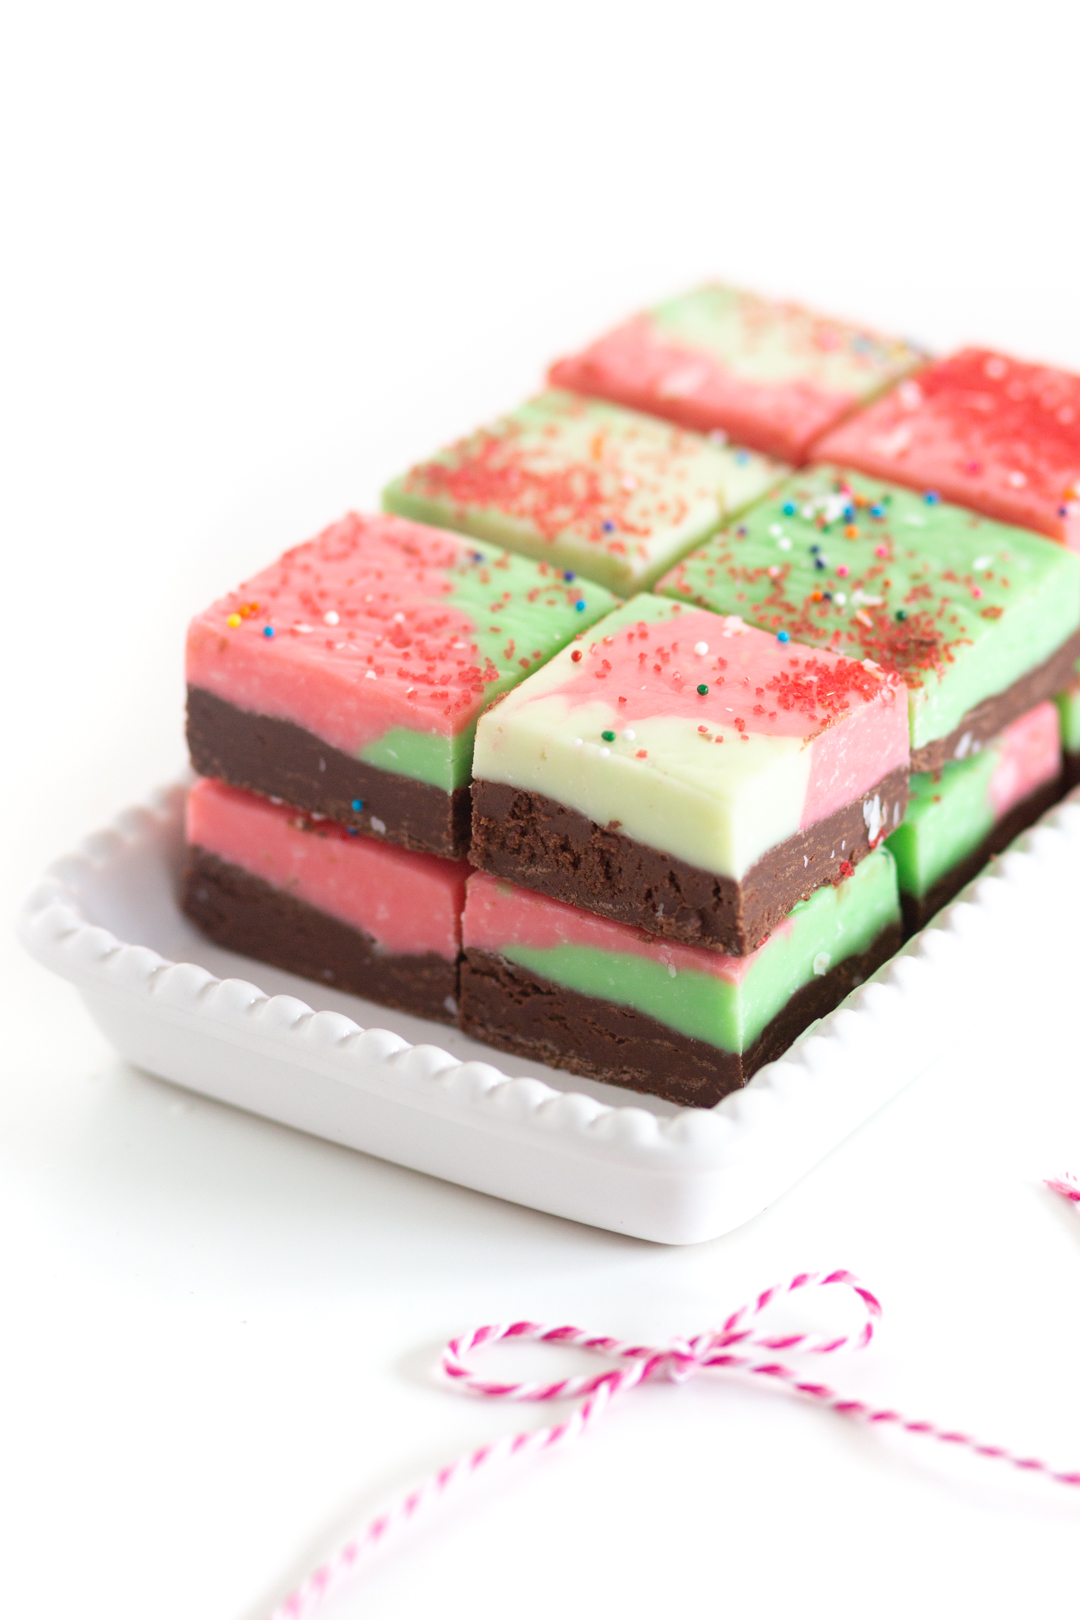 downward angle of fudge being served on a very small platter. red, green and chocolate swirled fudge with red sprinkles on top.